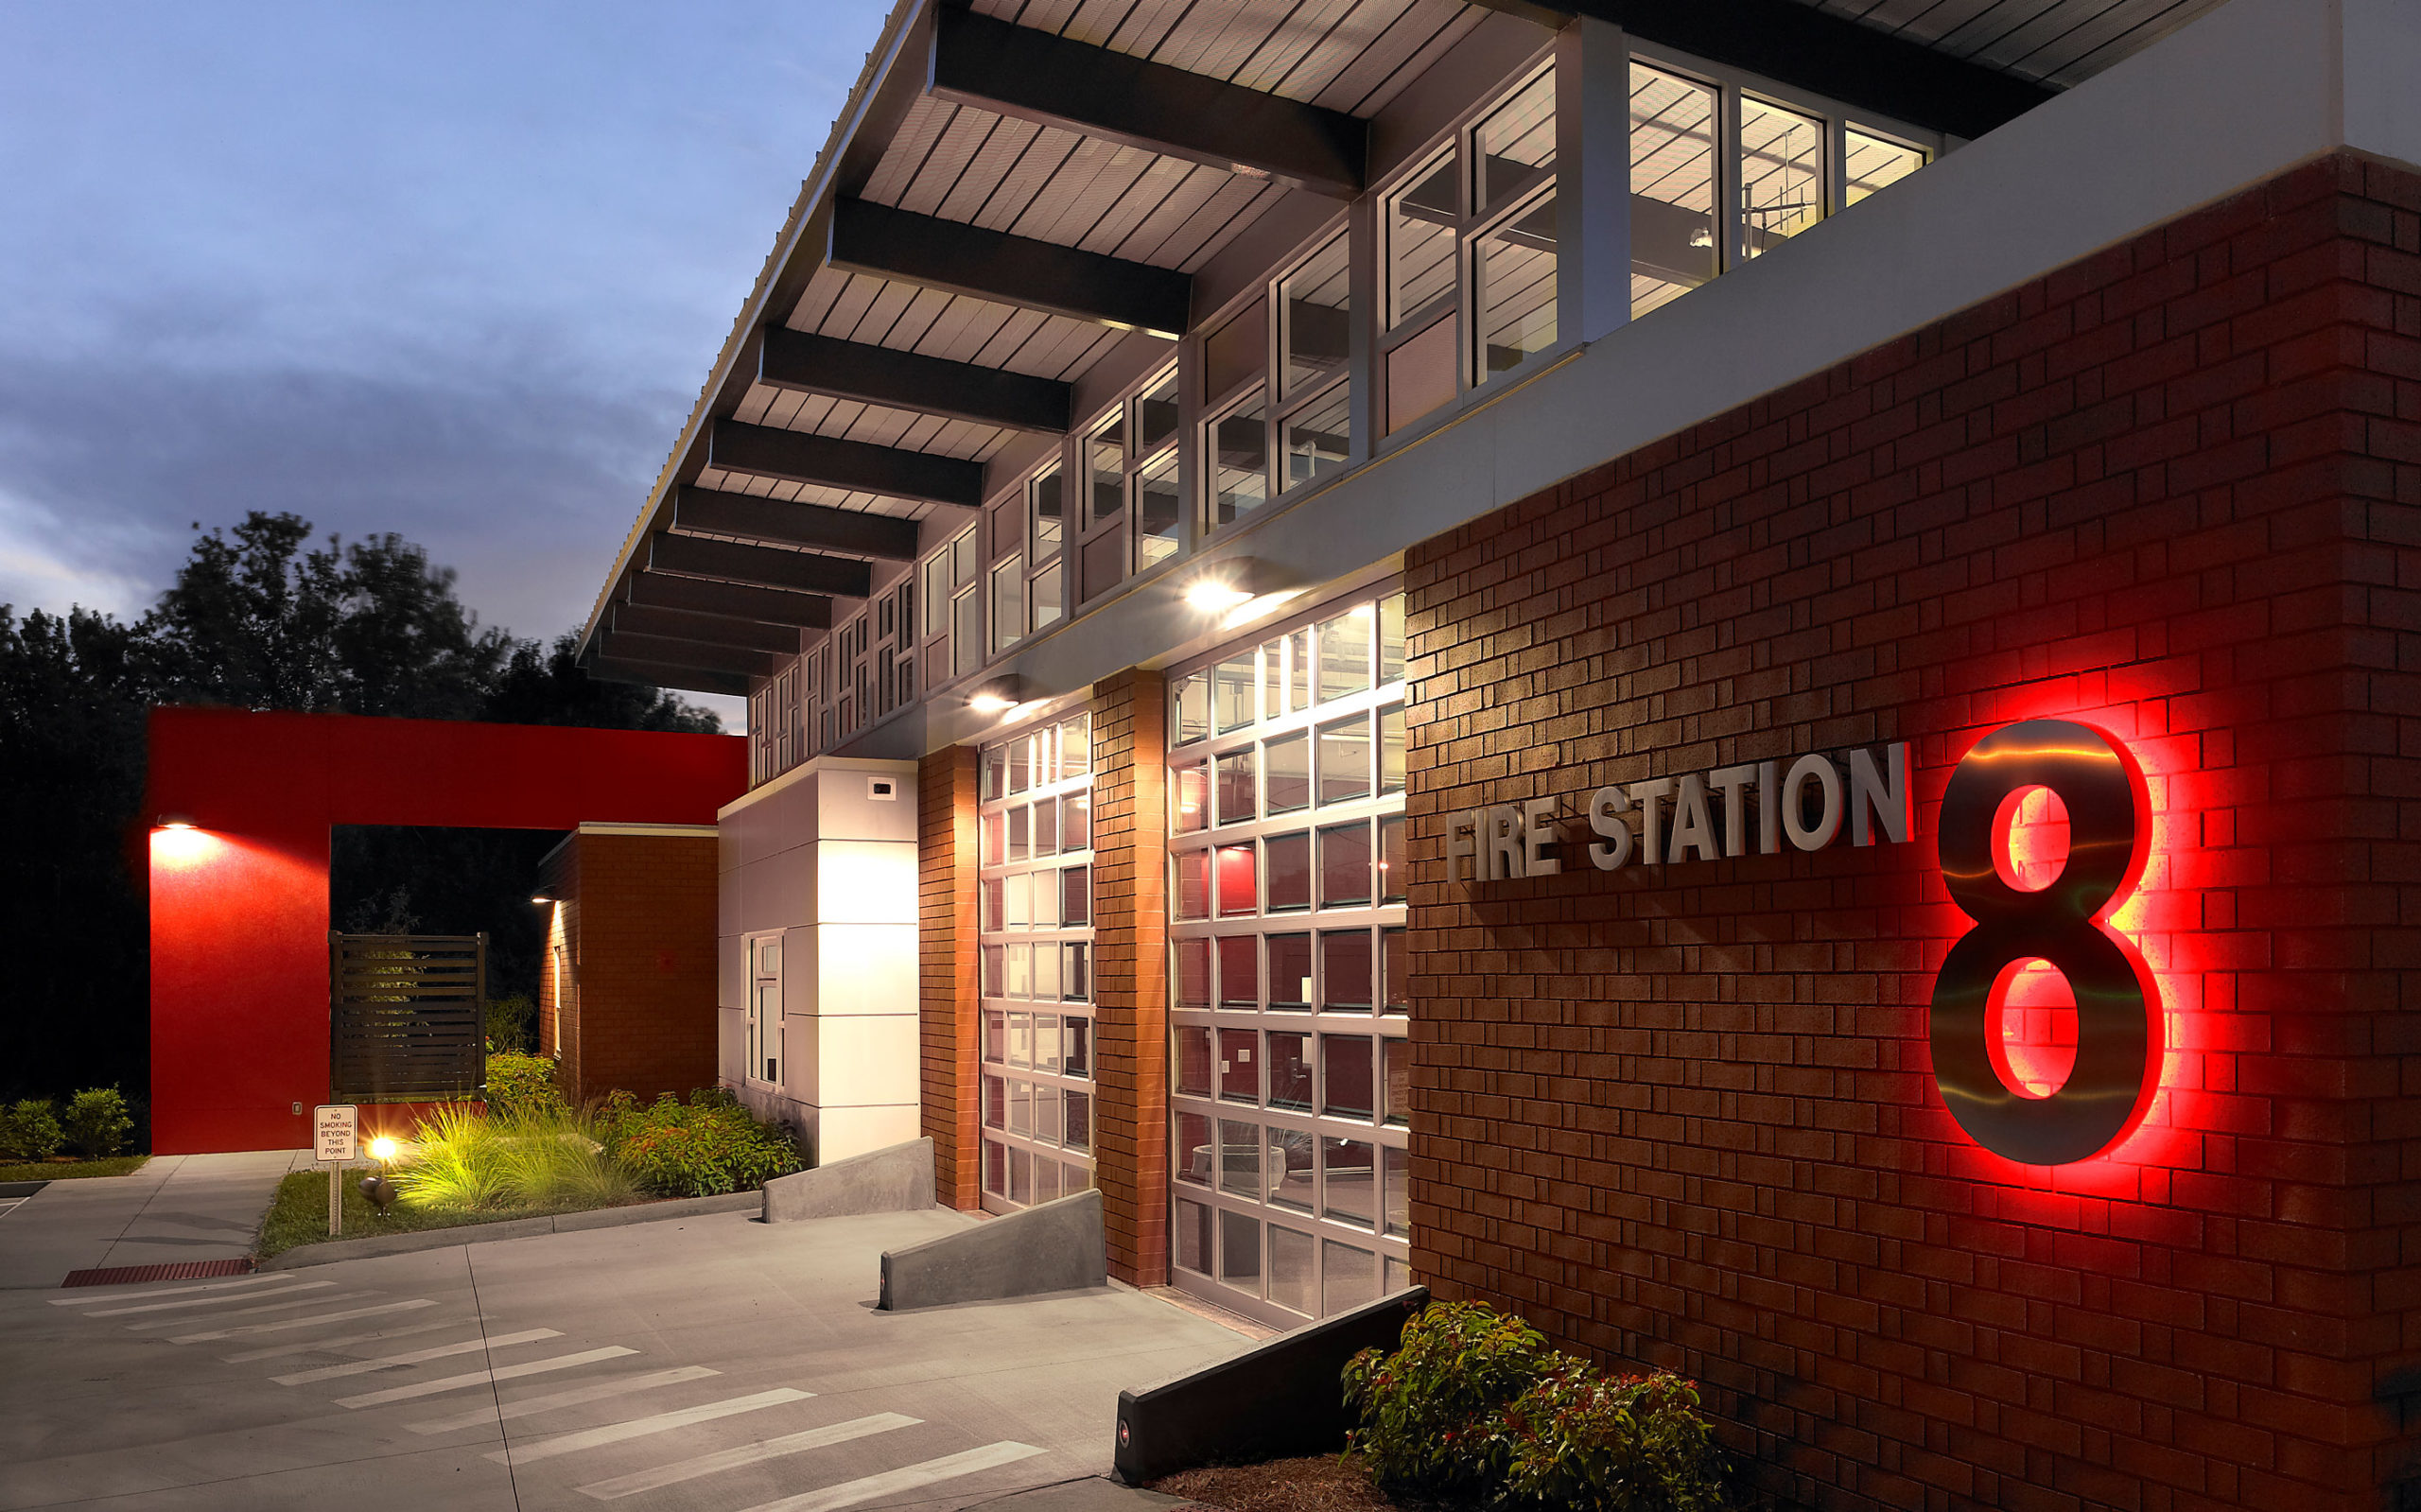 Lake Maggiore Fire Station #8 voted Best Looking Firehouse by Creative Loafing Tampa Bay